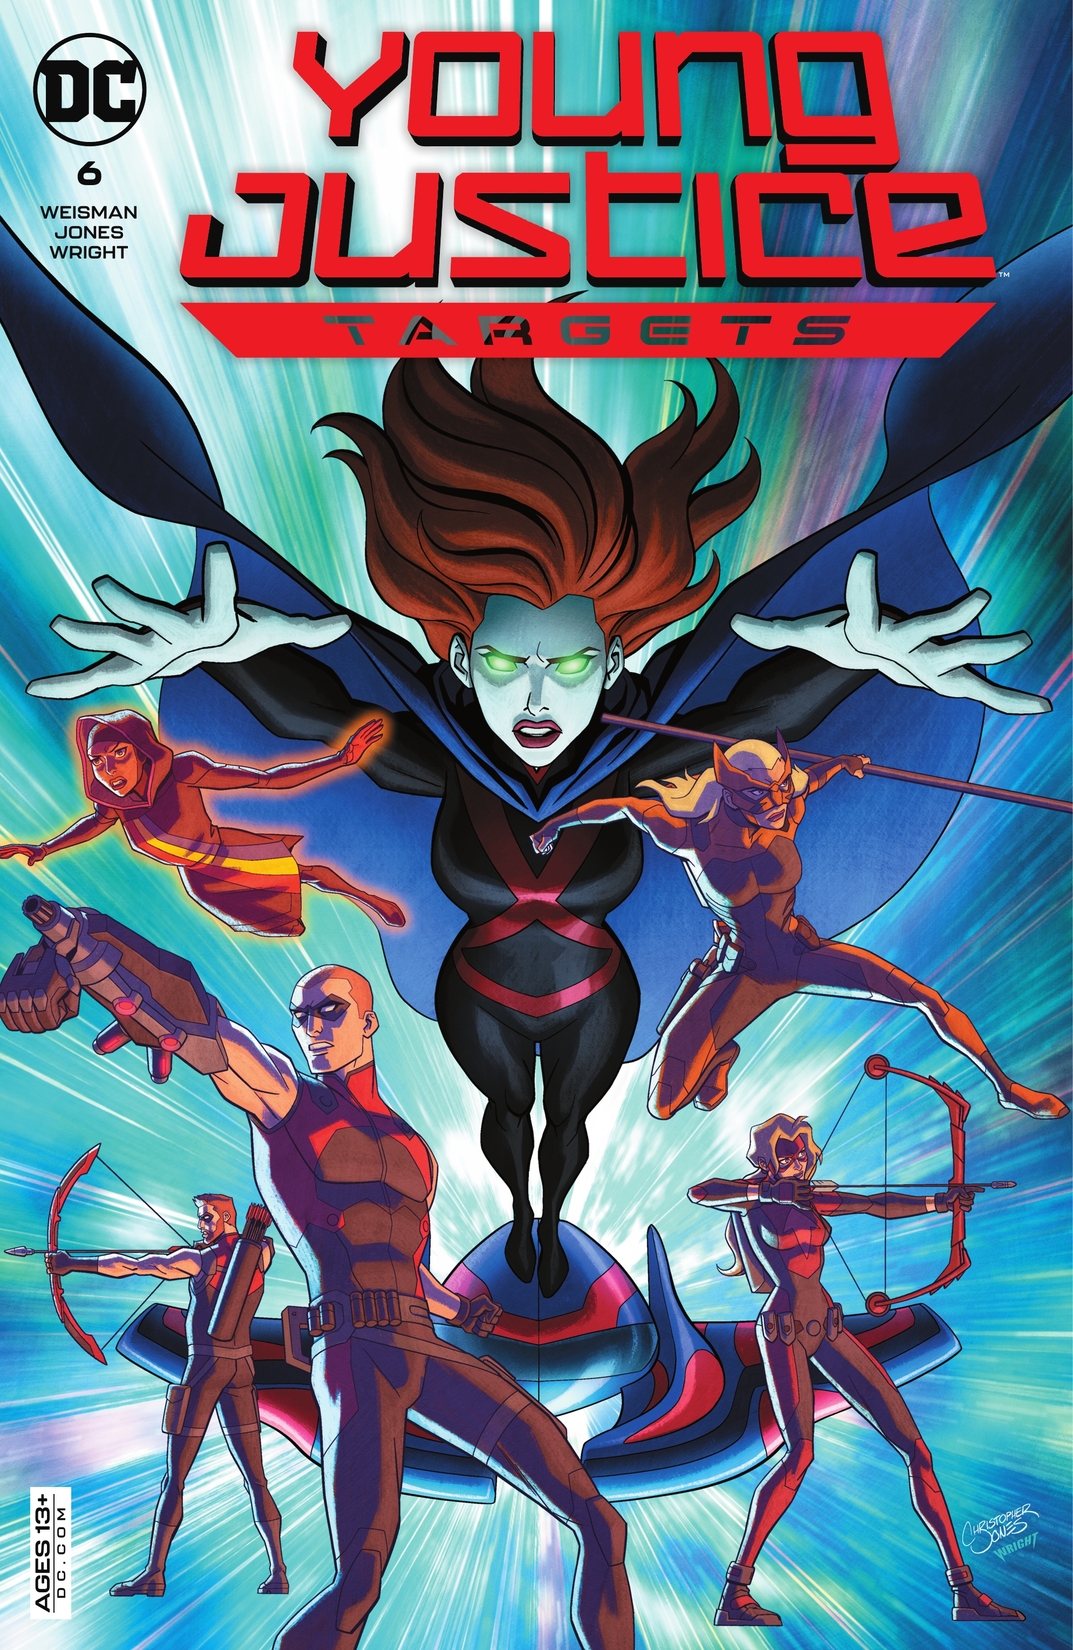 Young Justice: Targets Director's Cut #6 preview images